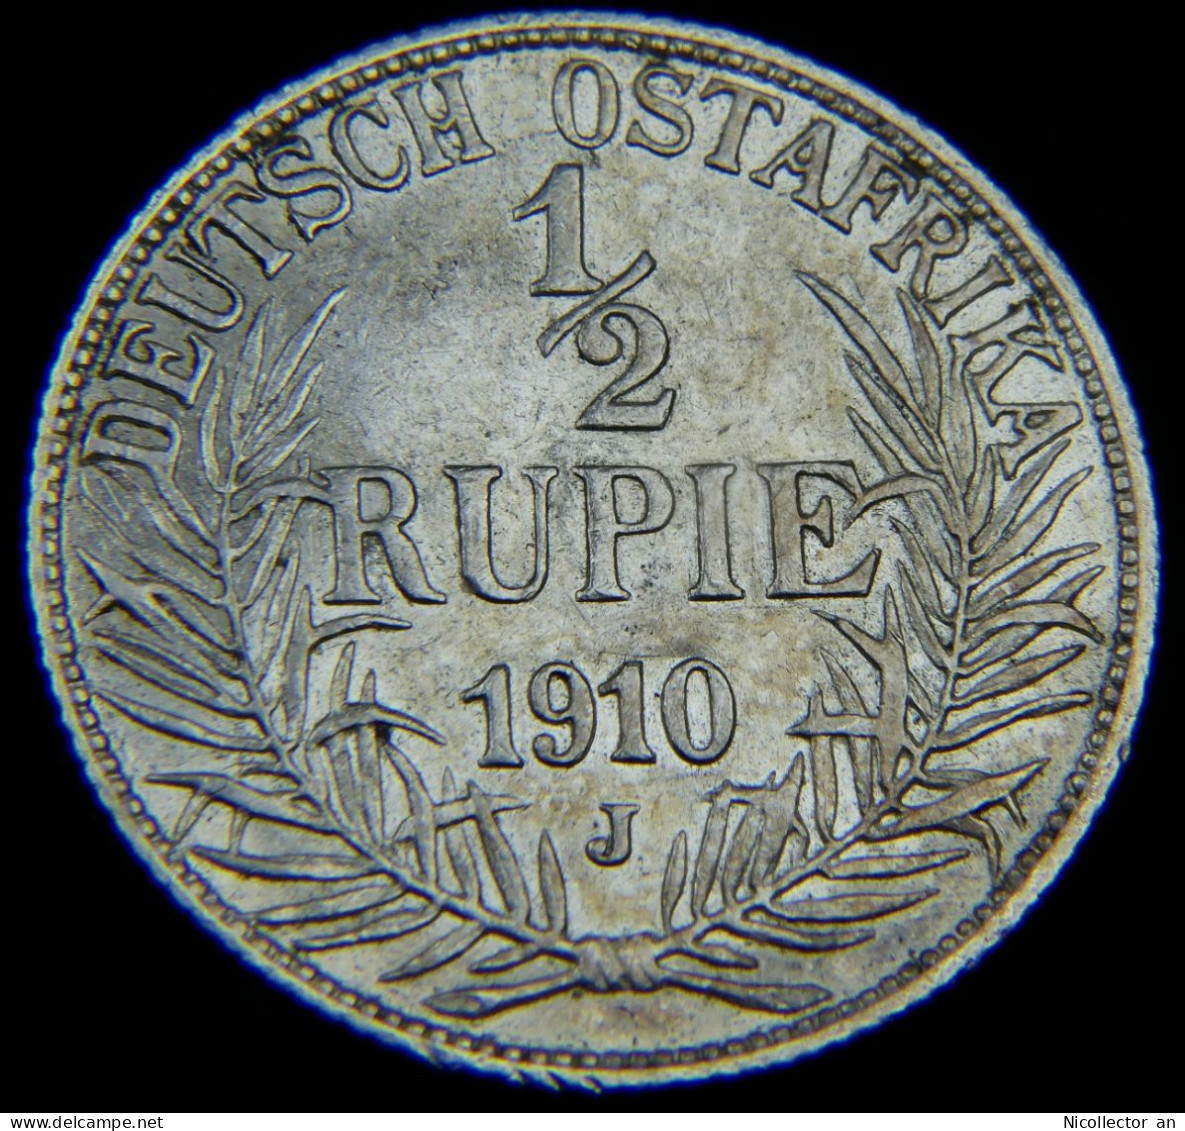 Germany East Africa 1/2 Rupee 1910 J *AU* Silver Rare Coin - Duits Oost-Afrika